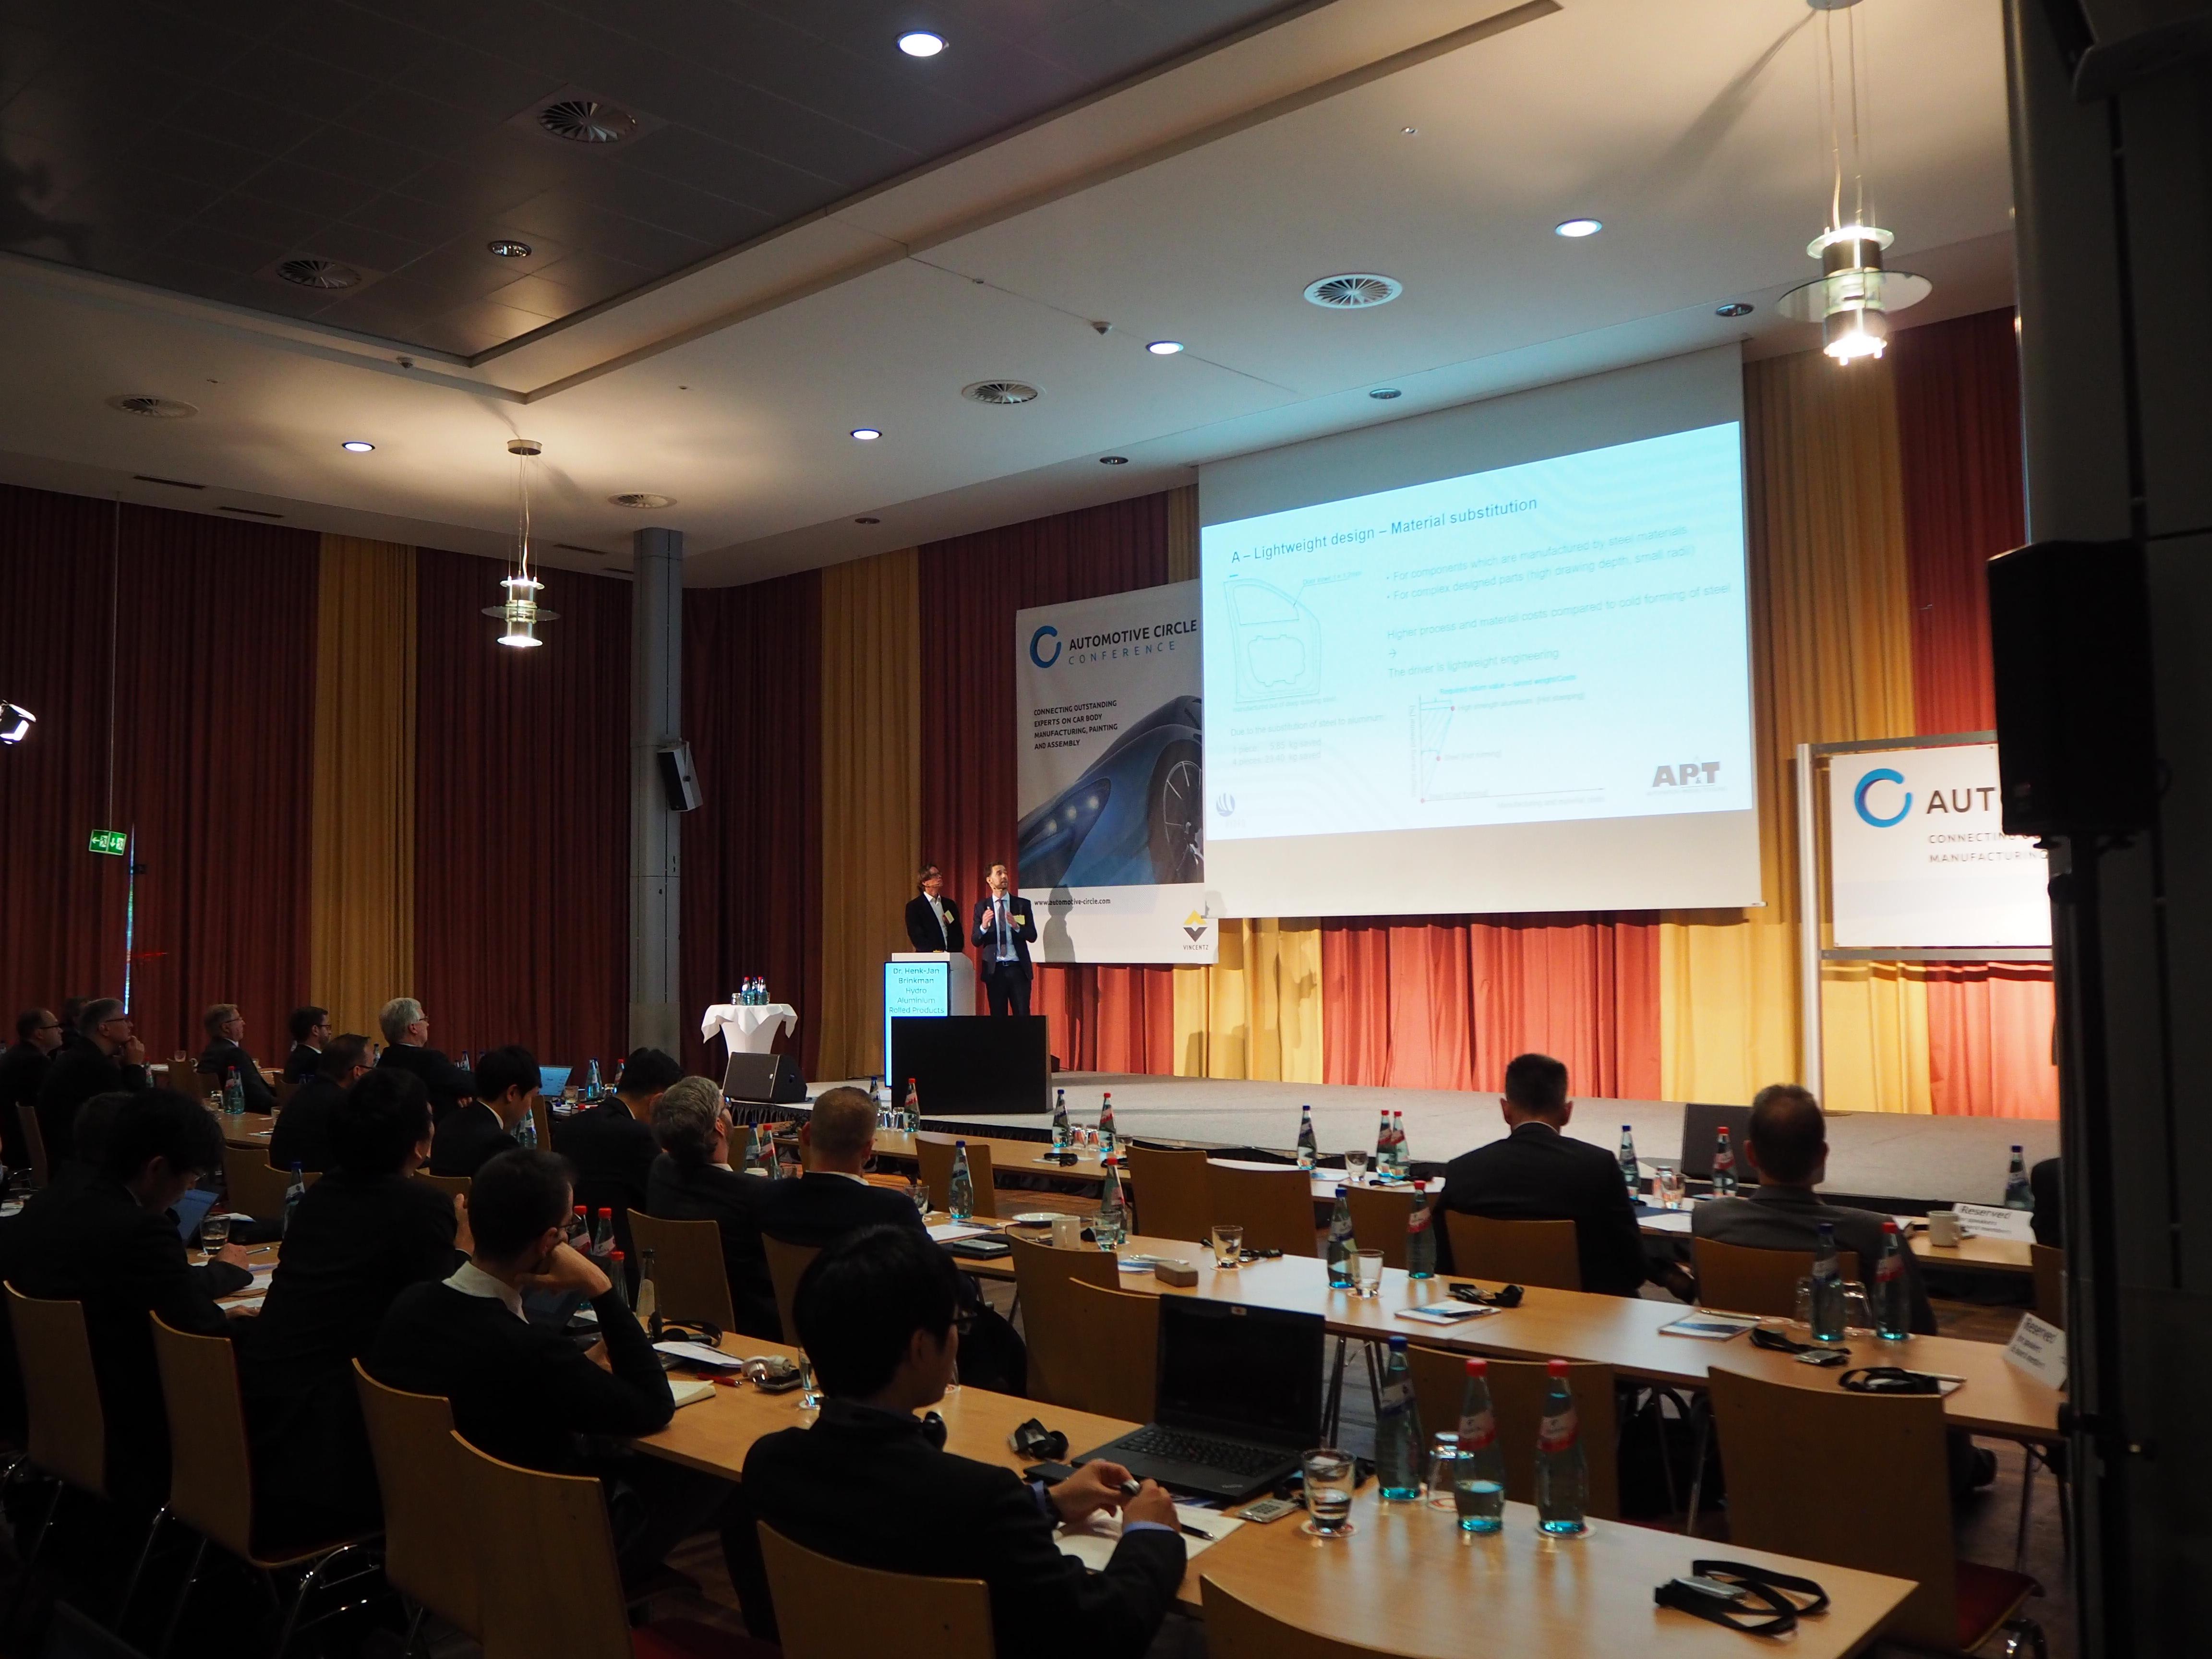 Dr. Michael Machhammer from AP&T and Dr. Henk-Jan Brinkman from Hydro Aluminium presented how hot forming of high-strength aluminum enables new opportunities for manufacturing lightweight and high-strength car body parts. (Photograph: Automotive Circle).